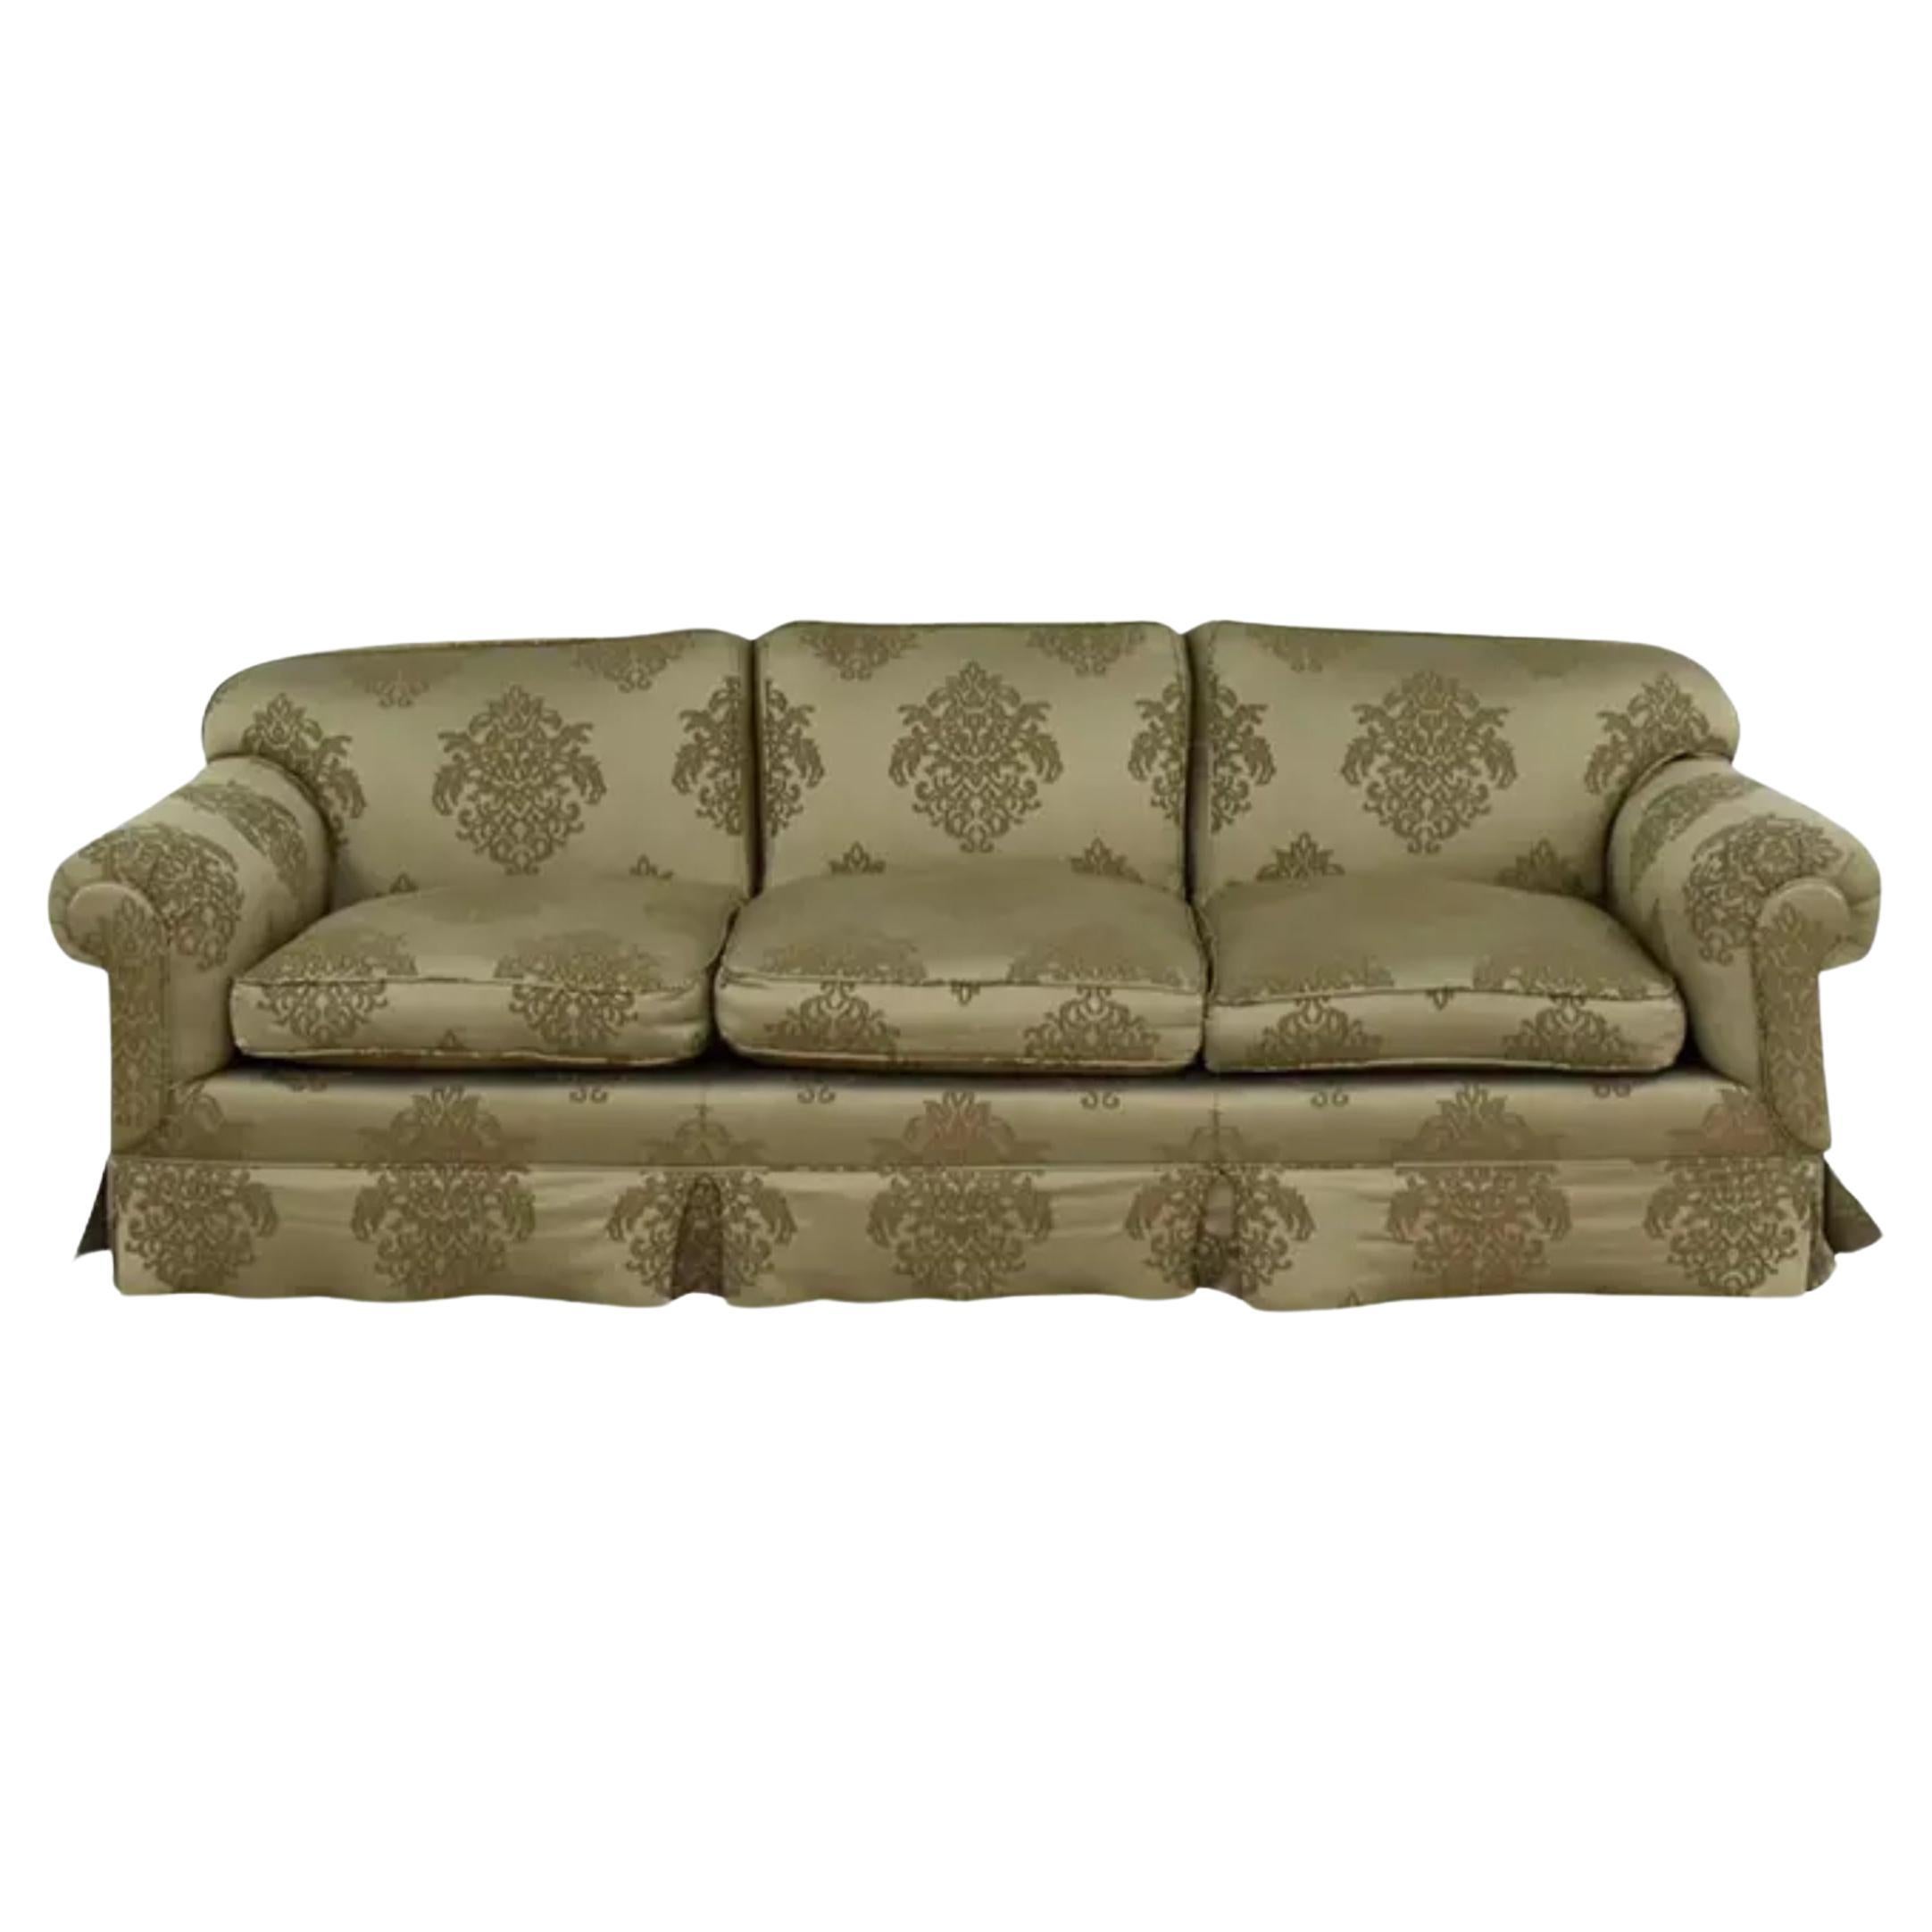 Gregorius Pineo Damask Upholstered Olive Green Roll Arm Sofa Settee